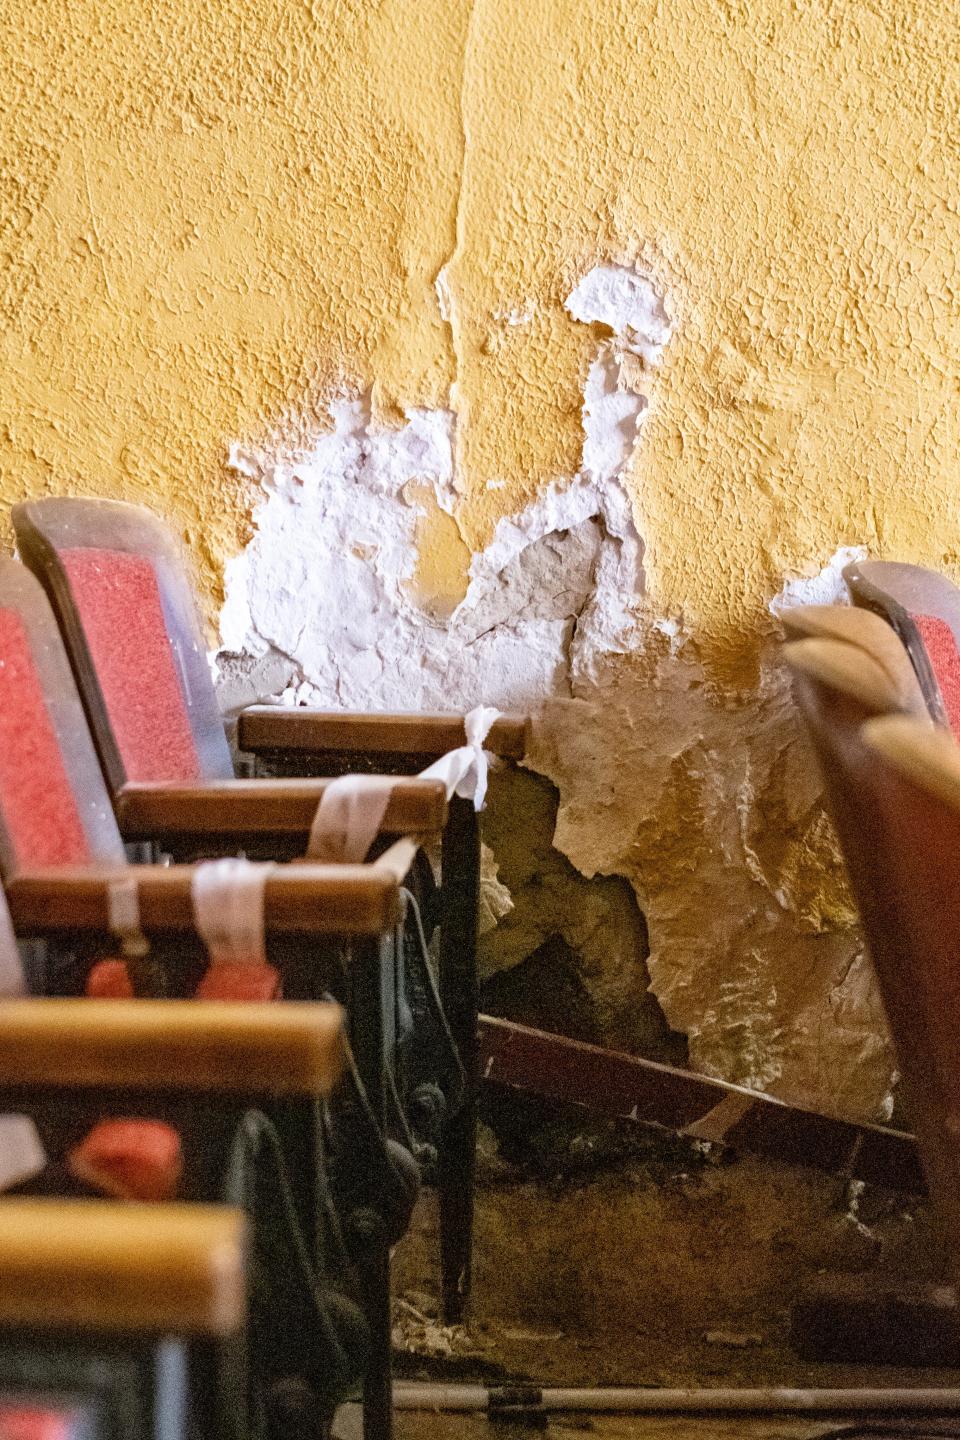 Water damage from the leaking roof is evident along the walls of the auditorium, requiring the blocking of adjacent seating.